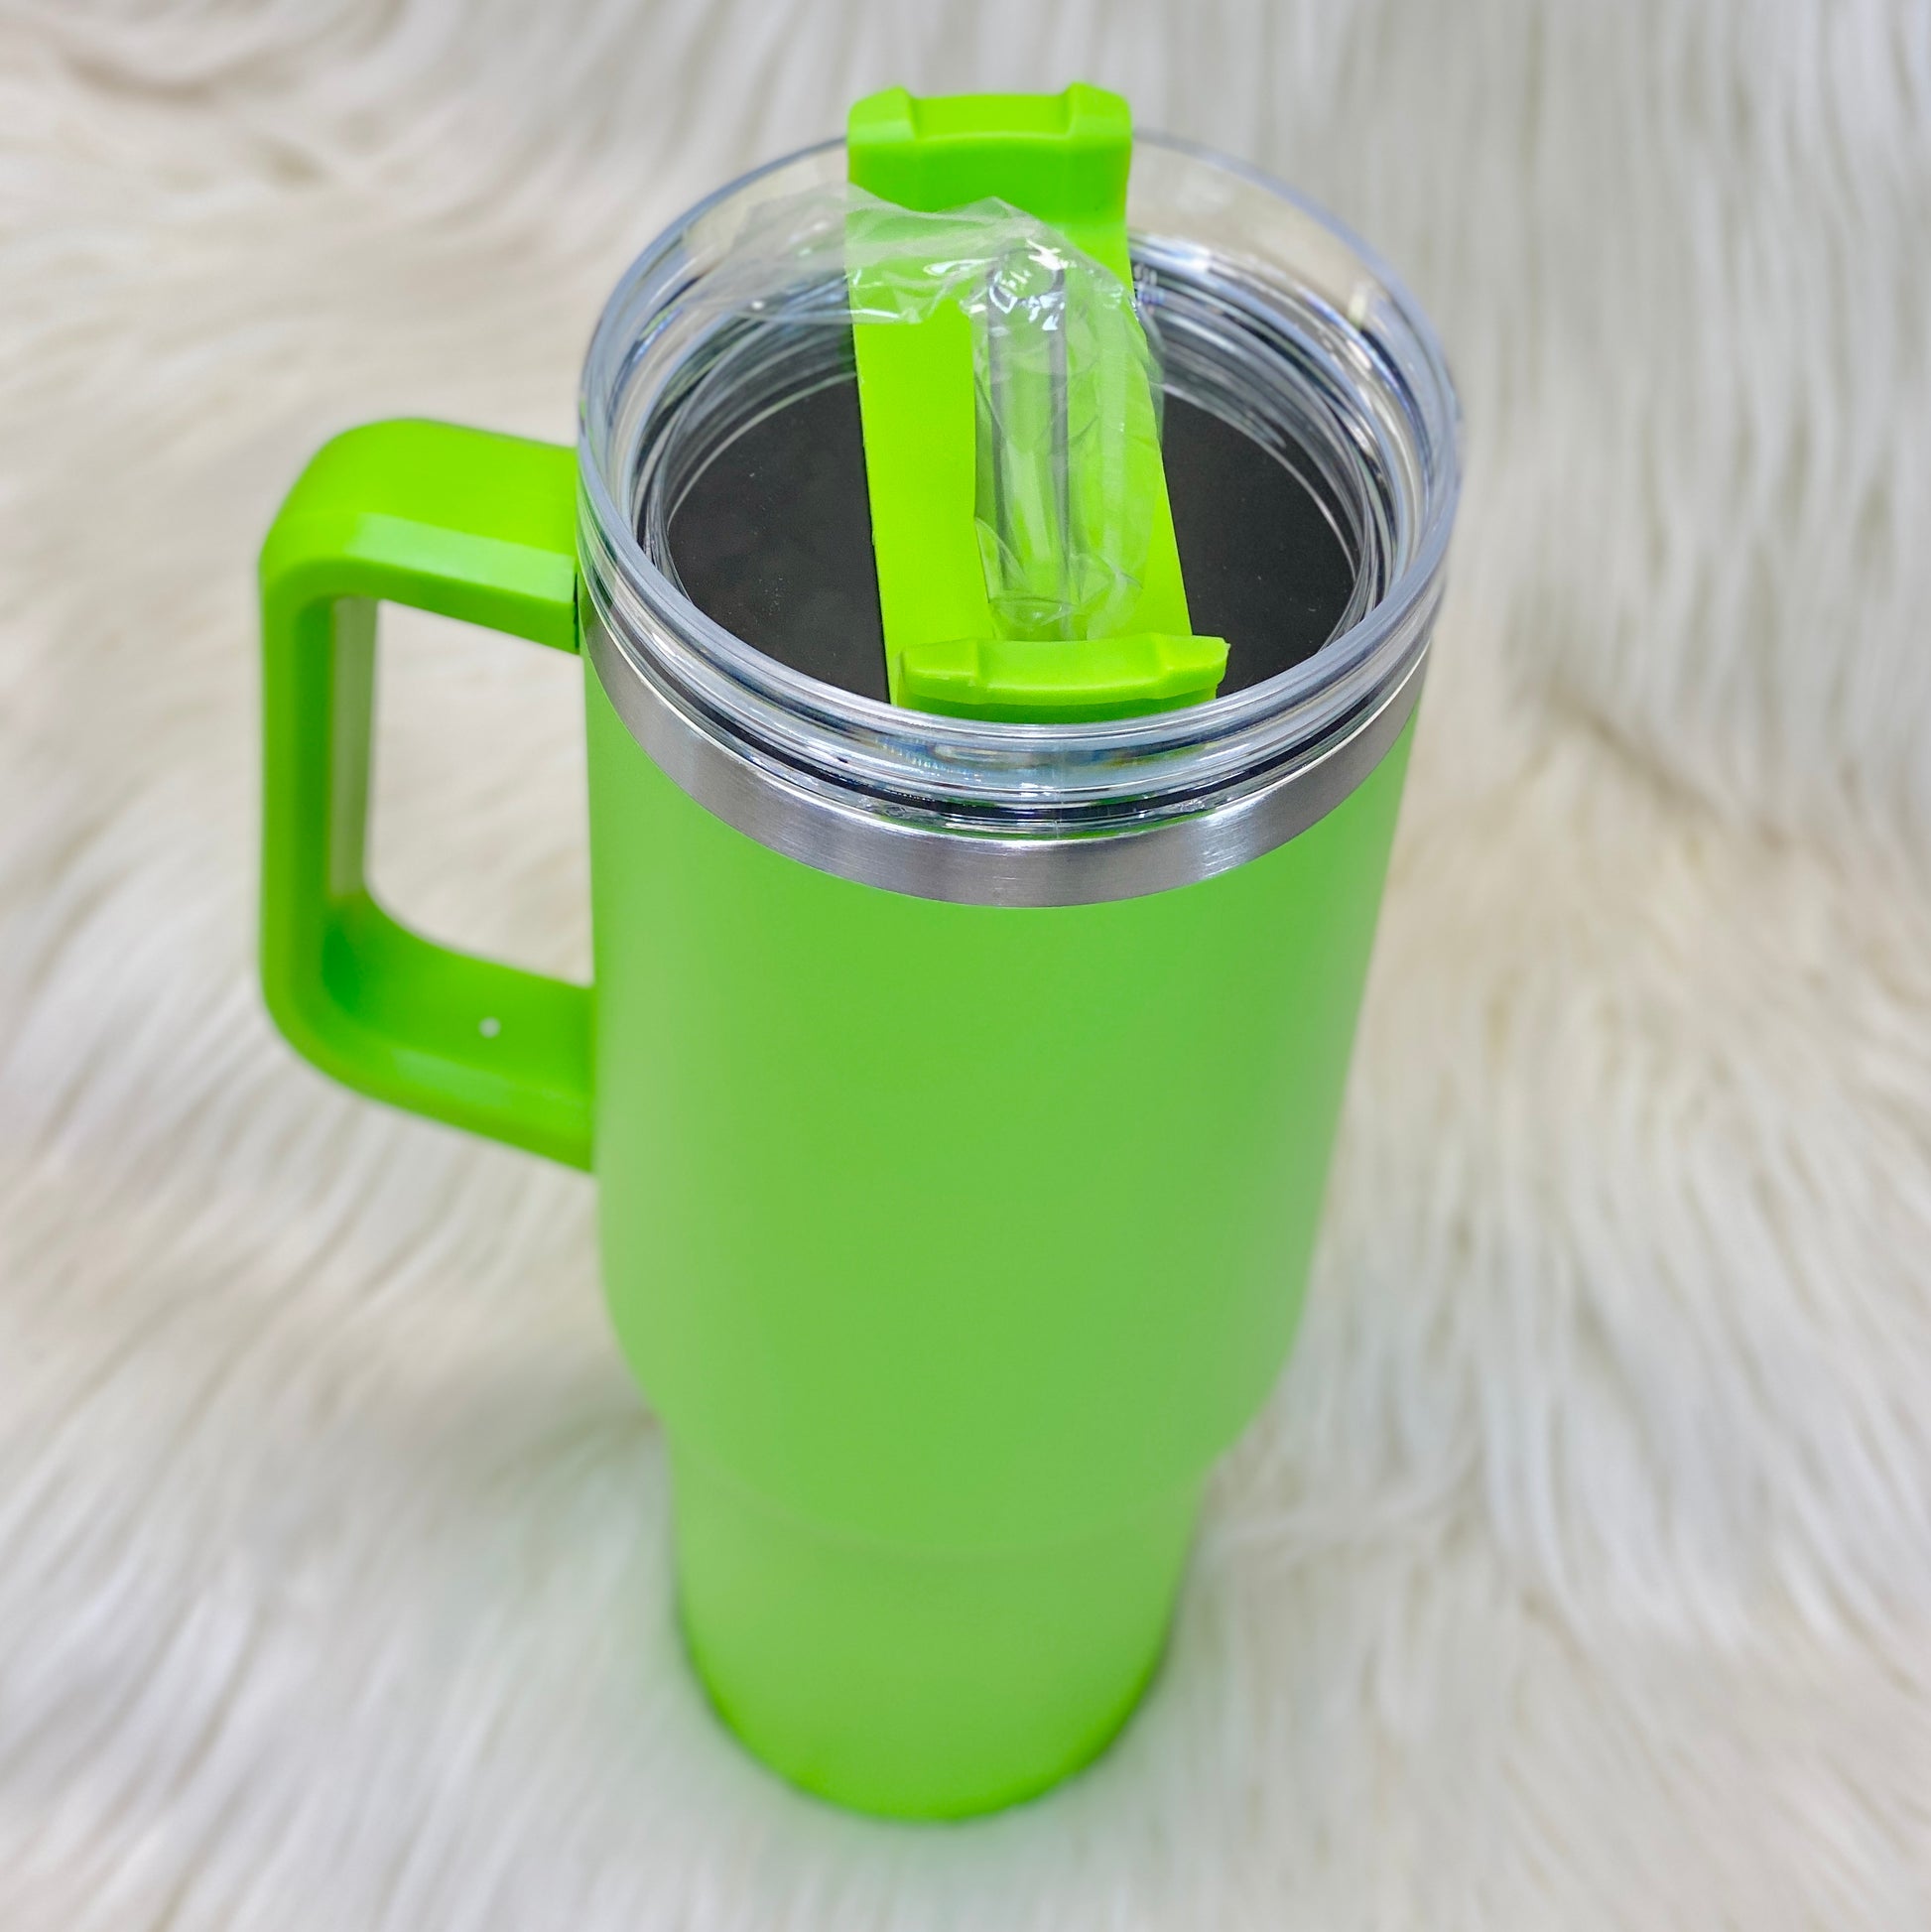 40 oz Tumbler with Handle in Lime Green